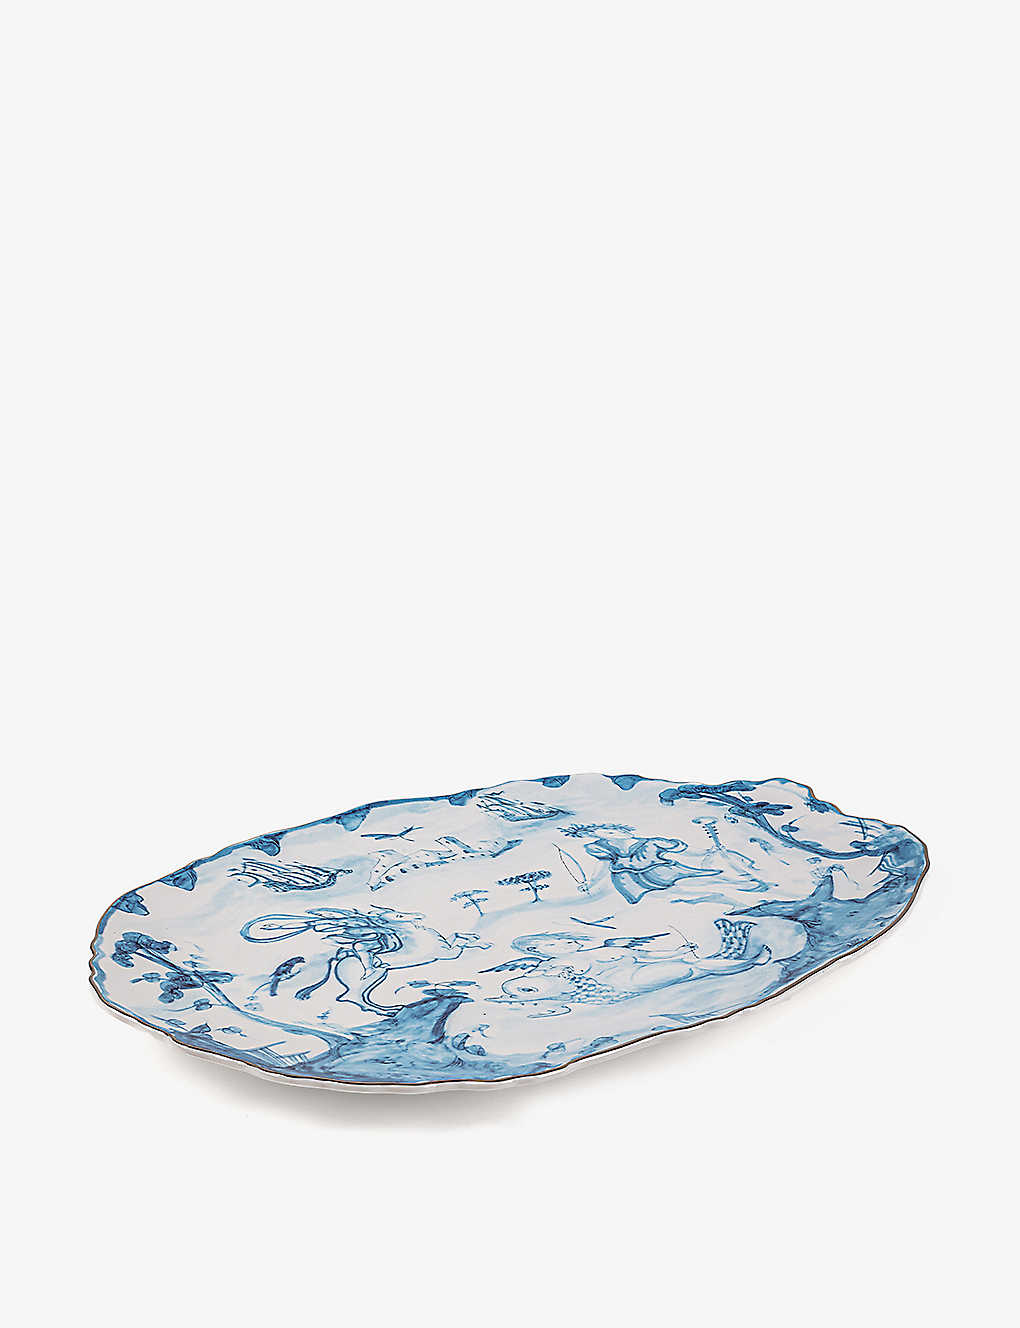 Seletti Acid Distorted Porcelain Tray 42cm In Blue